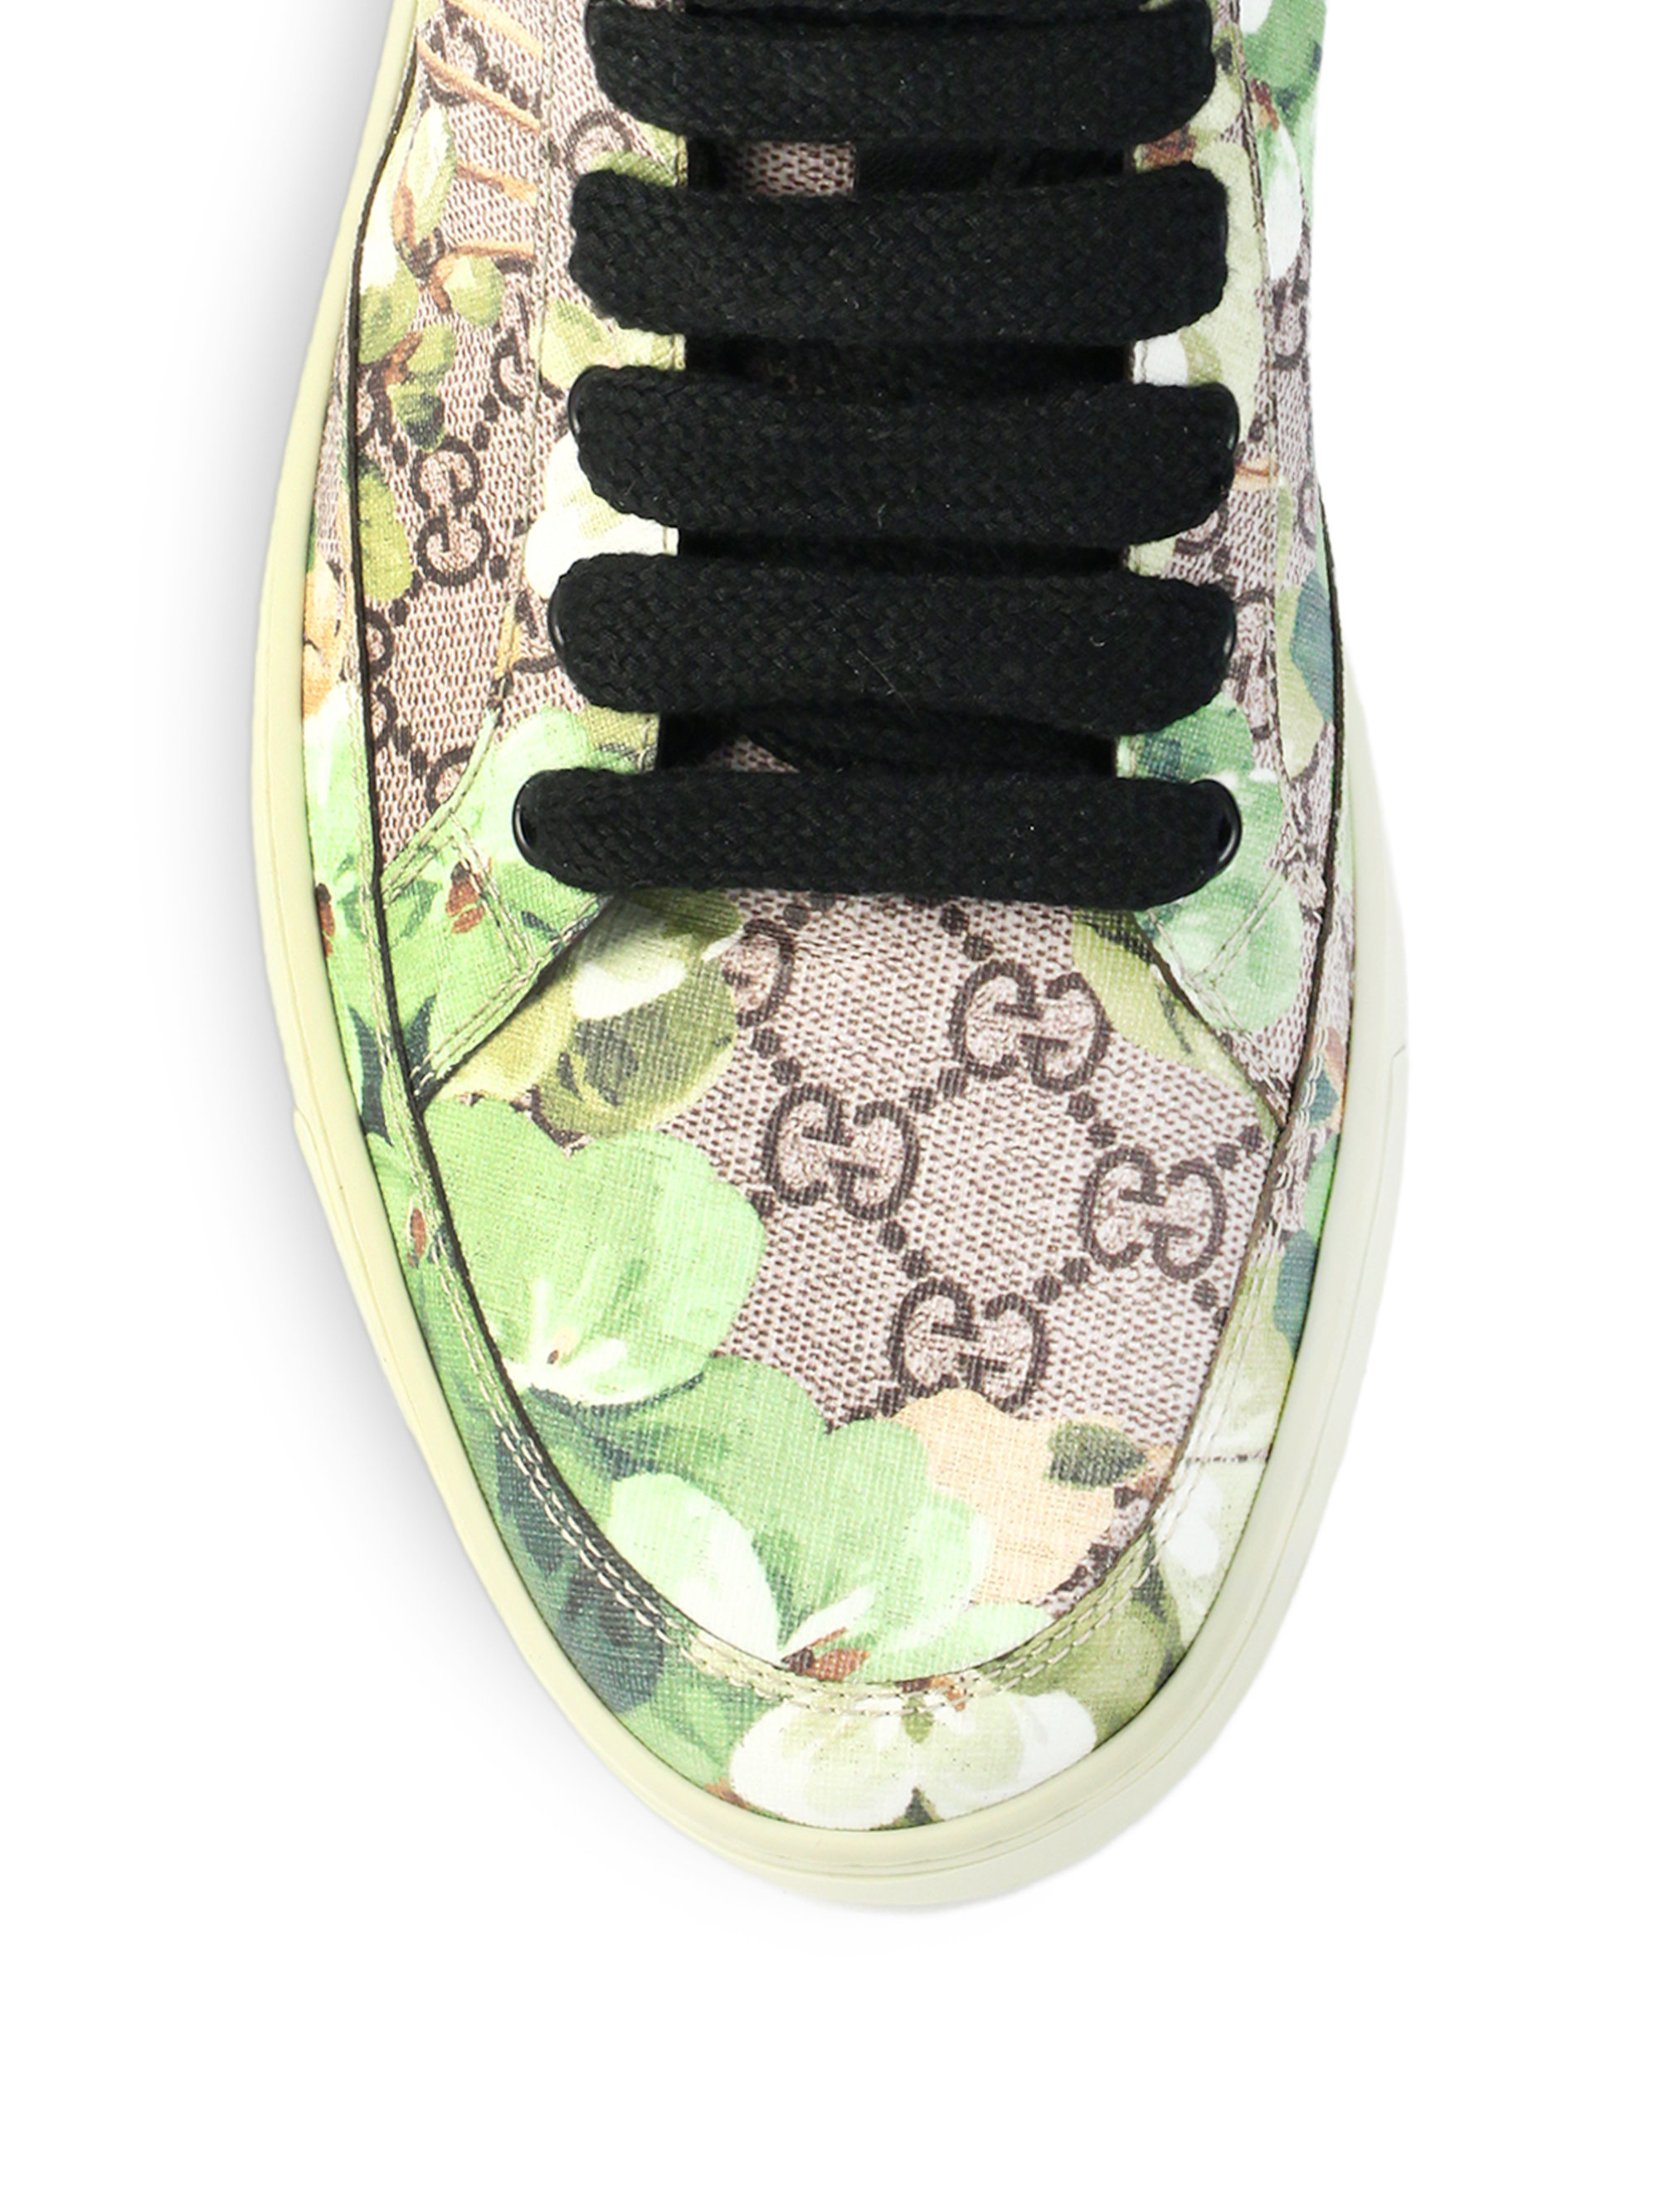 Gucci Gg Blooms High-top Sneaker in Blue